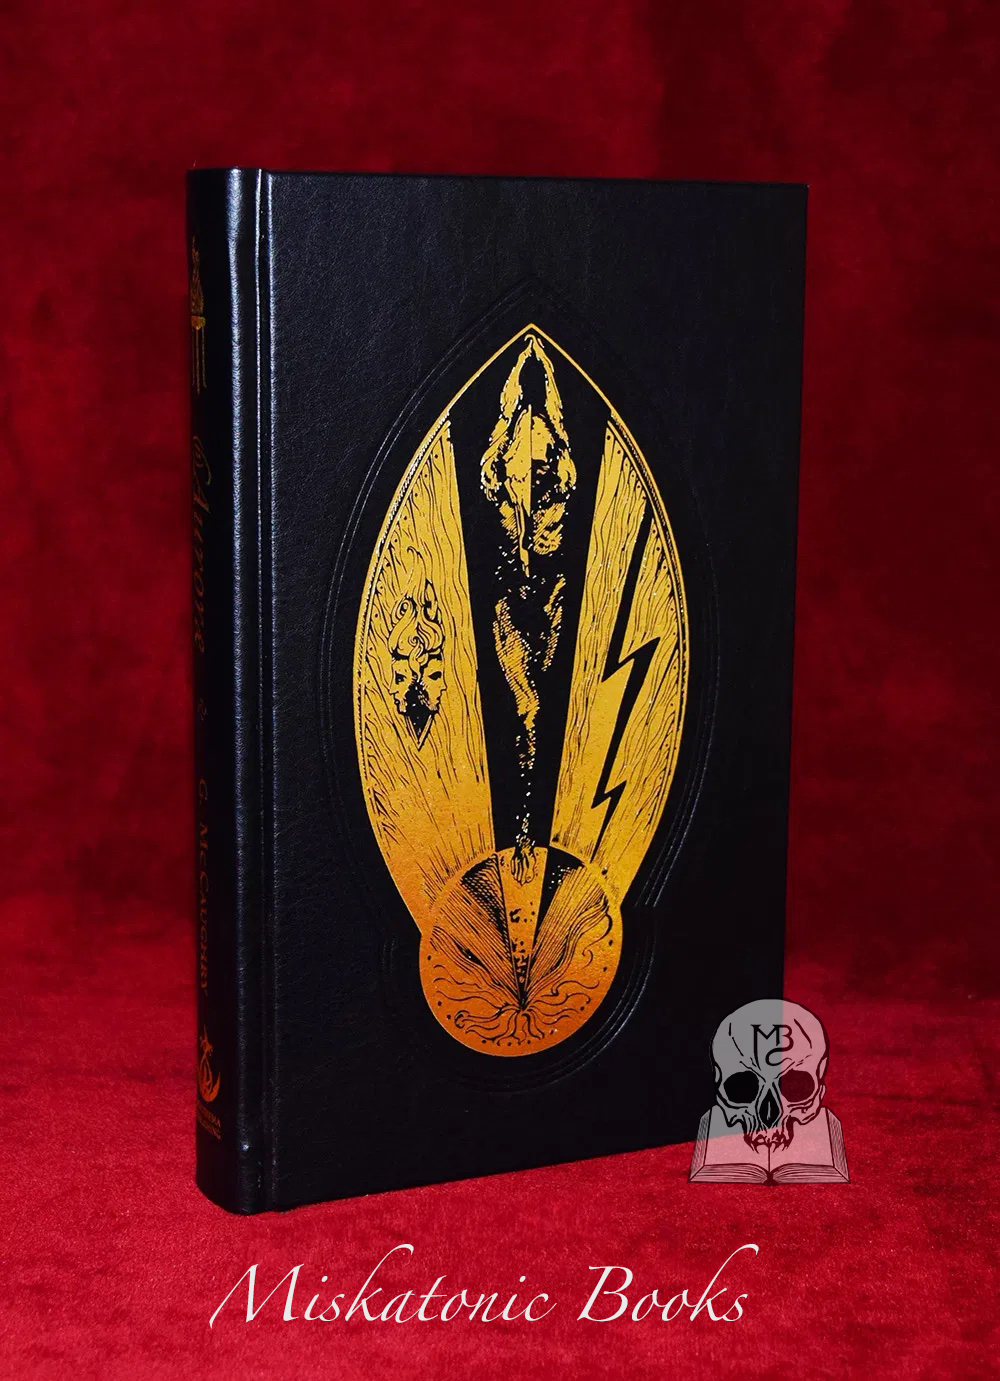 (h)Auroræ by Gabriel McCaughry - DELUXE "Collector's" Leather bound Limited Edition Hardcover